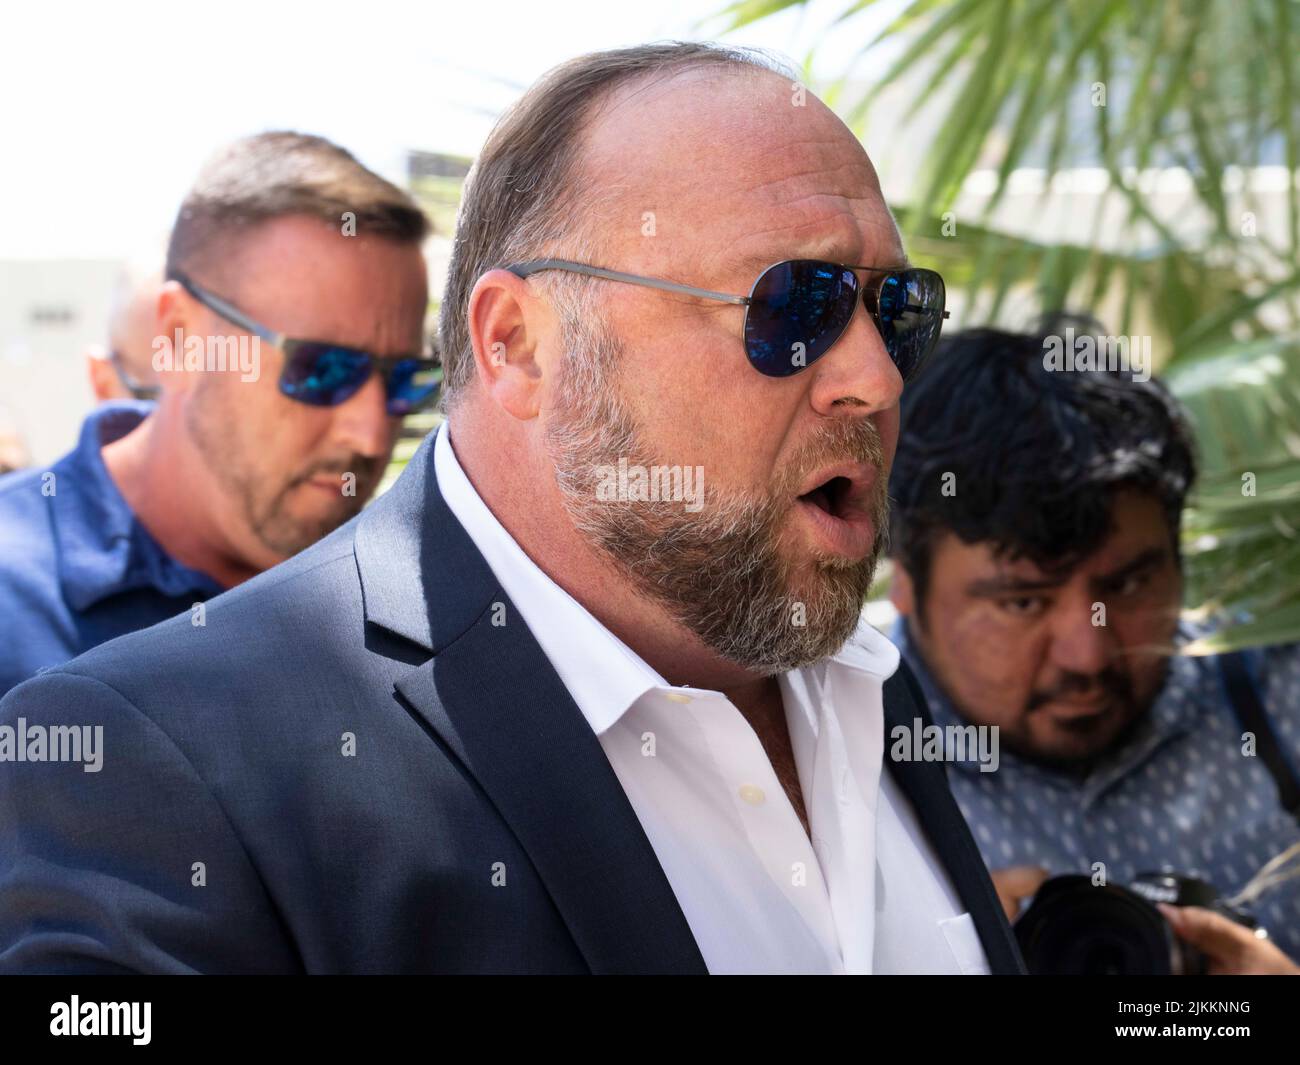 Austin, United States. 02nd Aug, 2022. Austin, United States. 2nd Aug, 2022. Flanked by several bodyguards, InfoWars head ALEX JONES arrives at the Travis County Courthouse for afternoon testimony in his defamation trial in Day 6 on August 2, 2022. Jones has been found guilty for defaming families in the 2012 Sandy Hook school massacre. The jury is to decide whether to award up to $150 million to Sandy Hook families. Credit: Bob Daemmrich/Alamy Live News Stock Photo